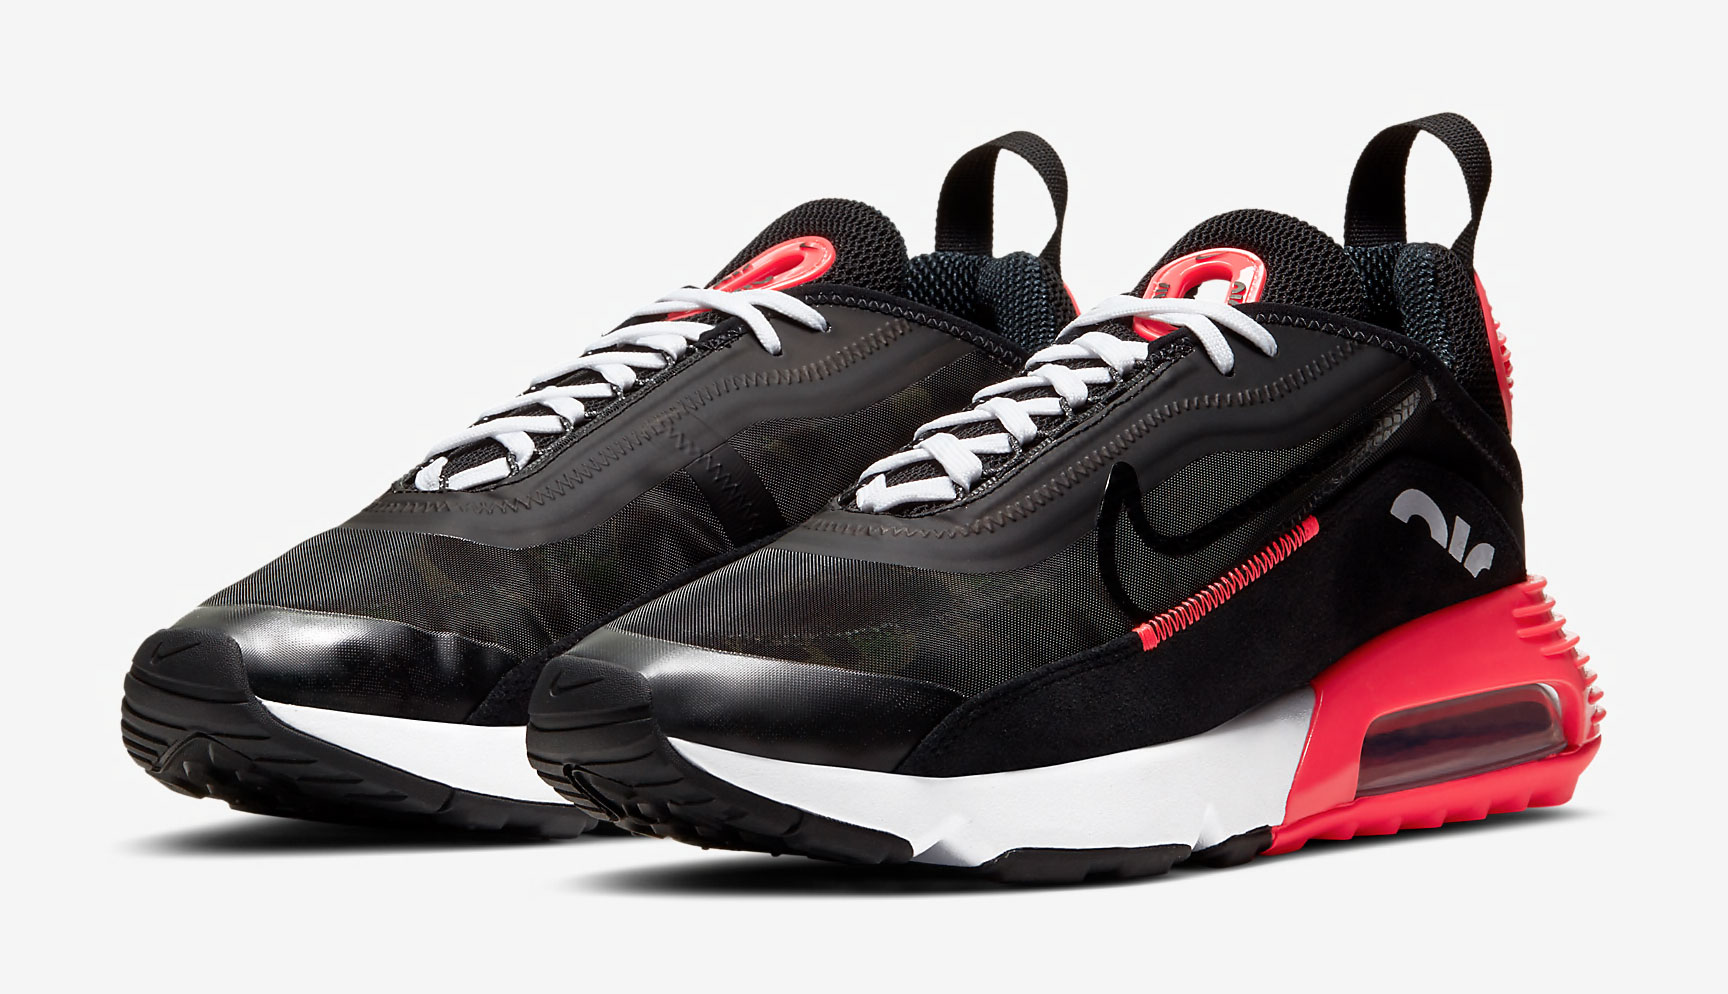 nike-air-max-2090-infrared-duck-camo-release-date-1